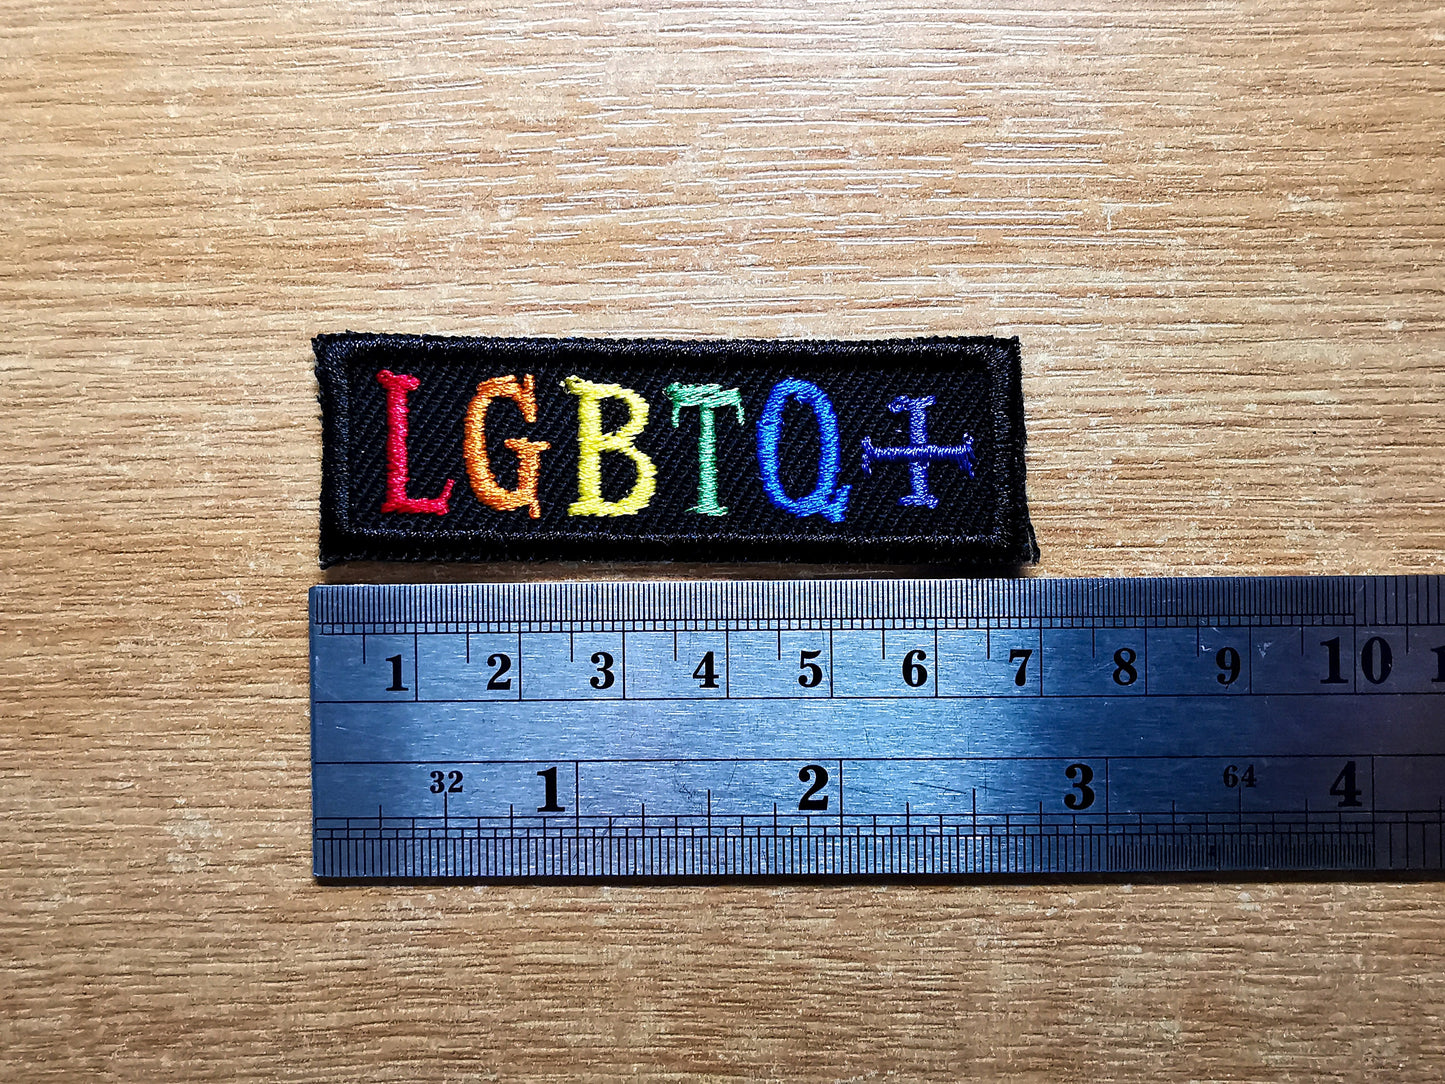 LGBTQ+ Small Rainbow Iron On Patch Pride Embroidered